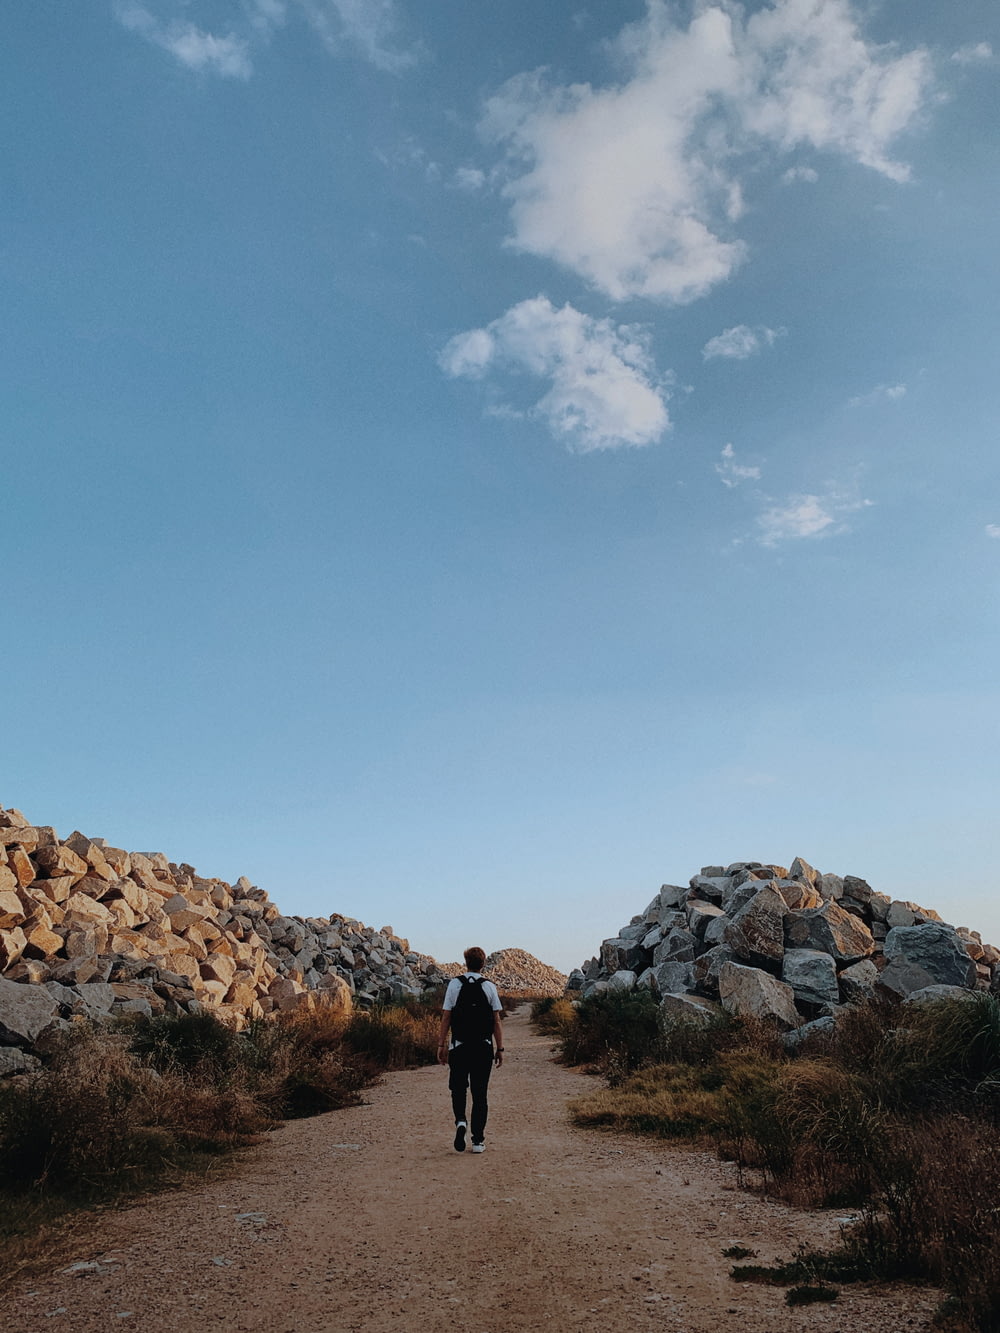 a man walking down a dirt road next to a pile of rocks